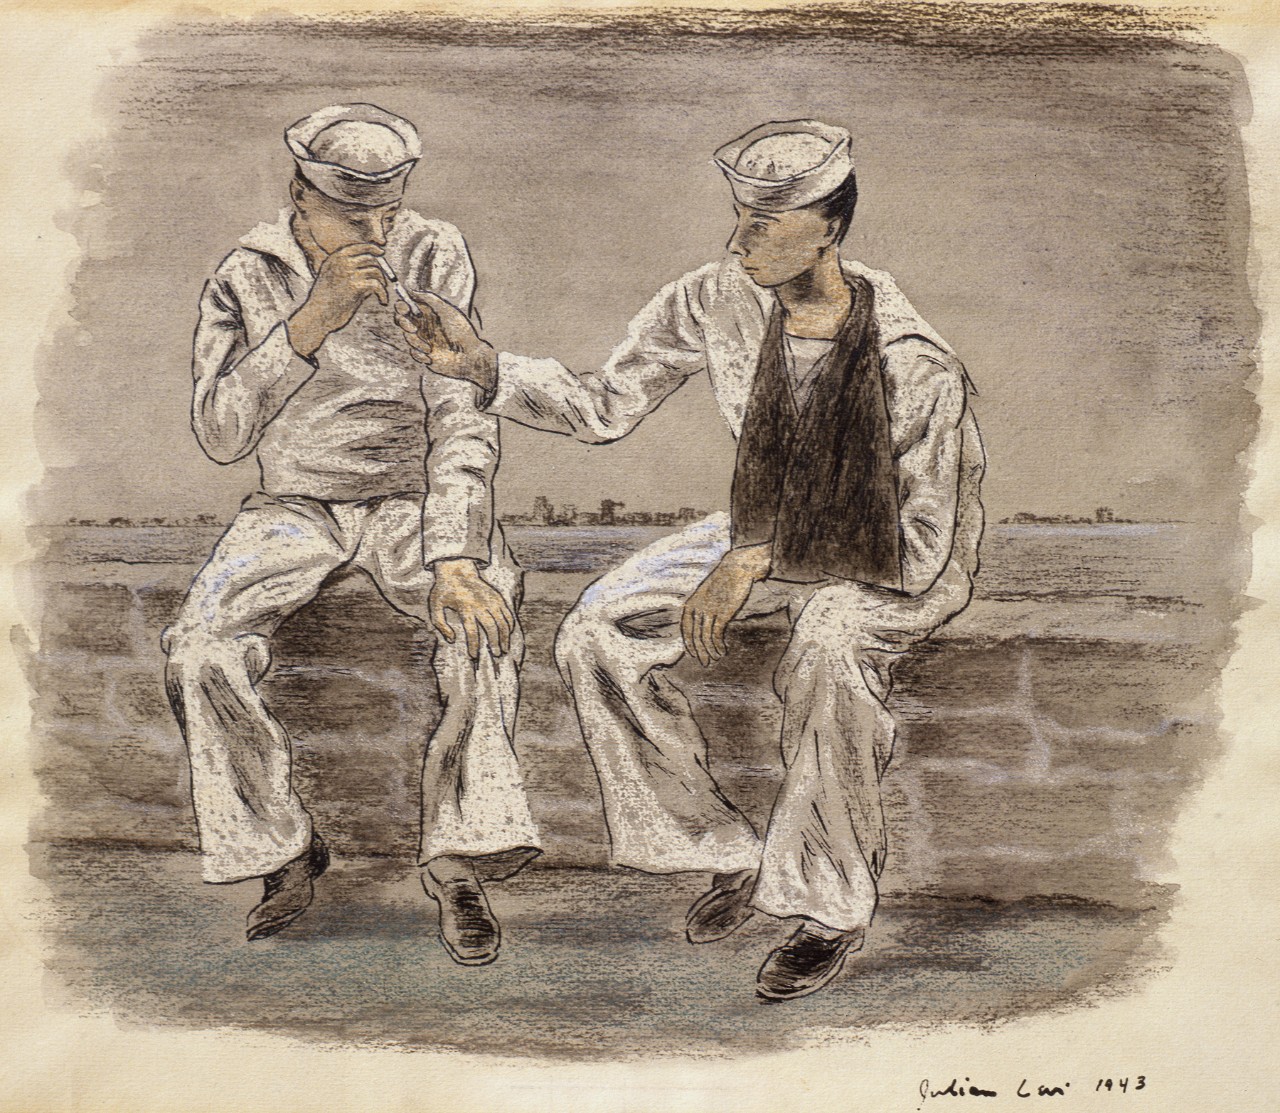 Two sailors smoking, one of them has his arm in a sling